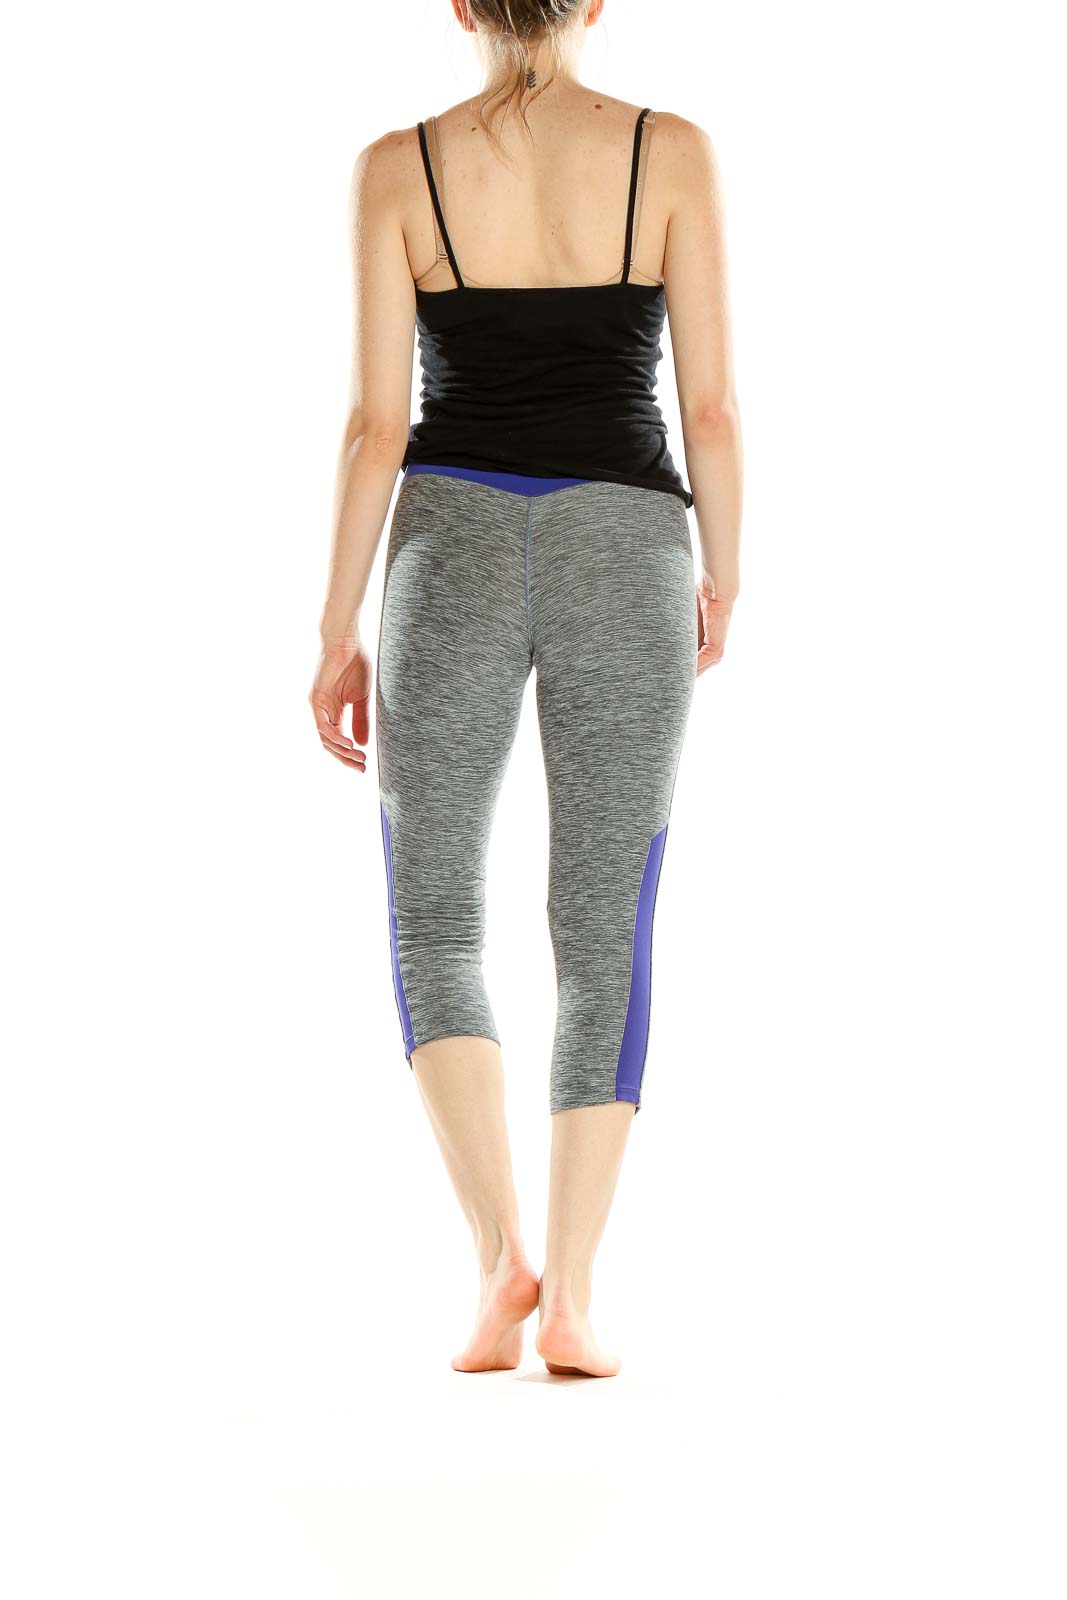 New Balance - Gray Cropped Activewear Leggings Polyester Spandex